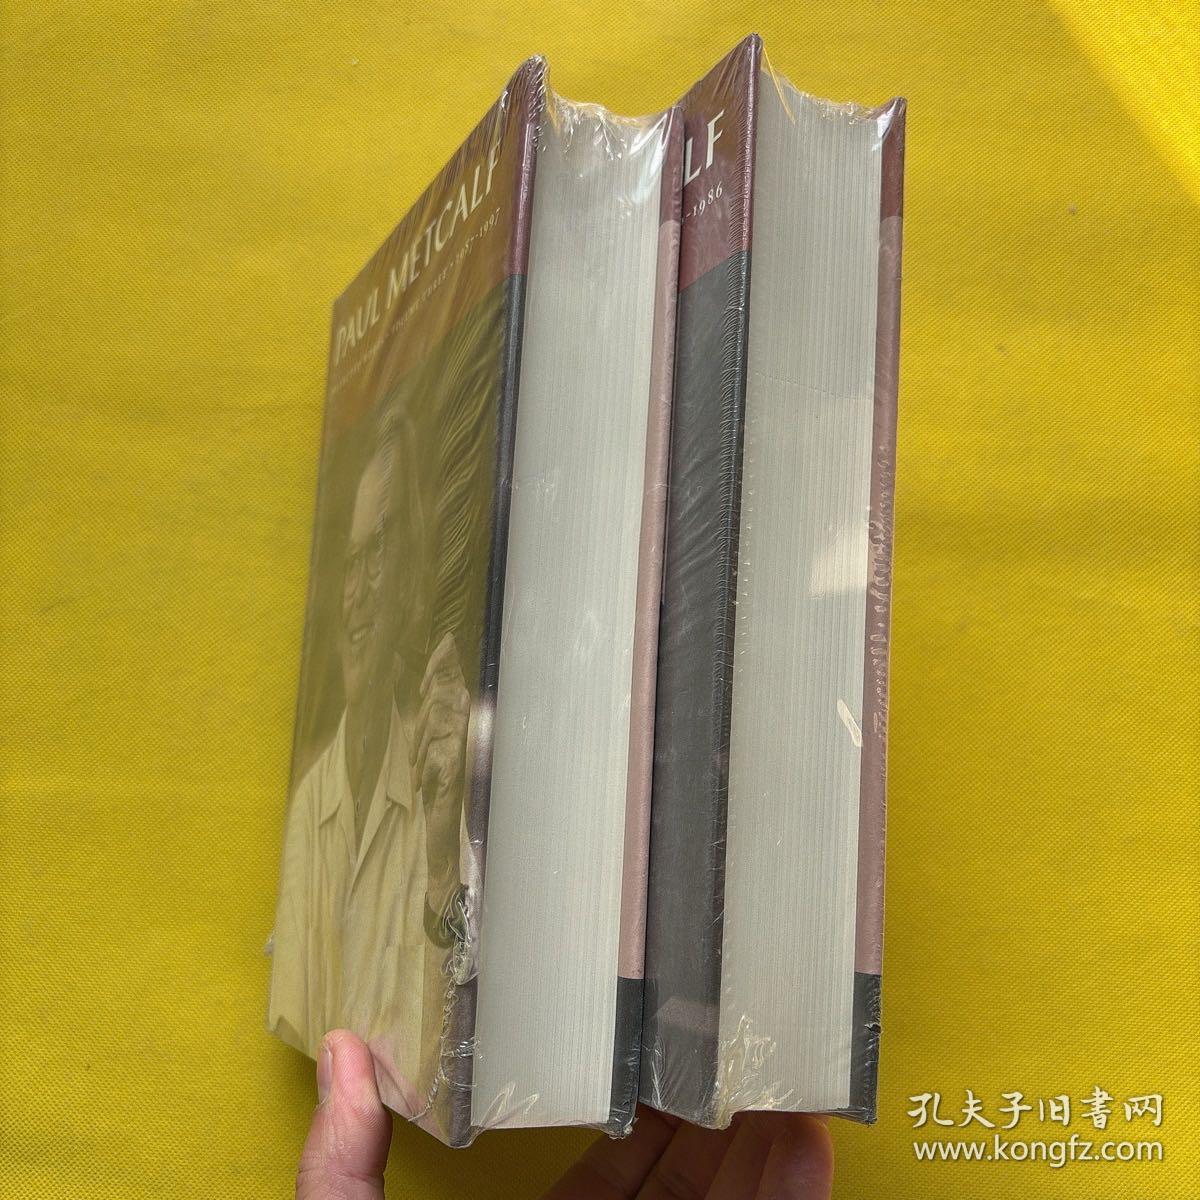 Paul Metcalf Collected Works, Volume Three+Volume Two（2本合售）全新未拆包装 精装